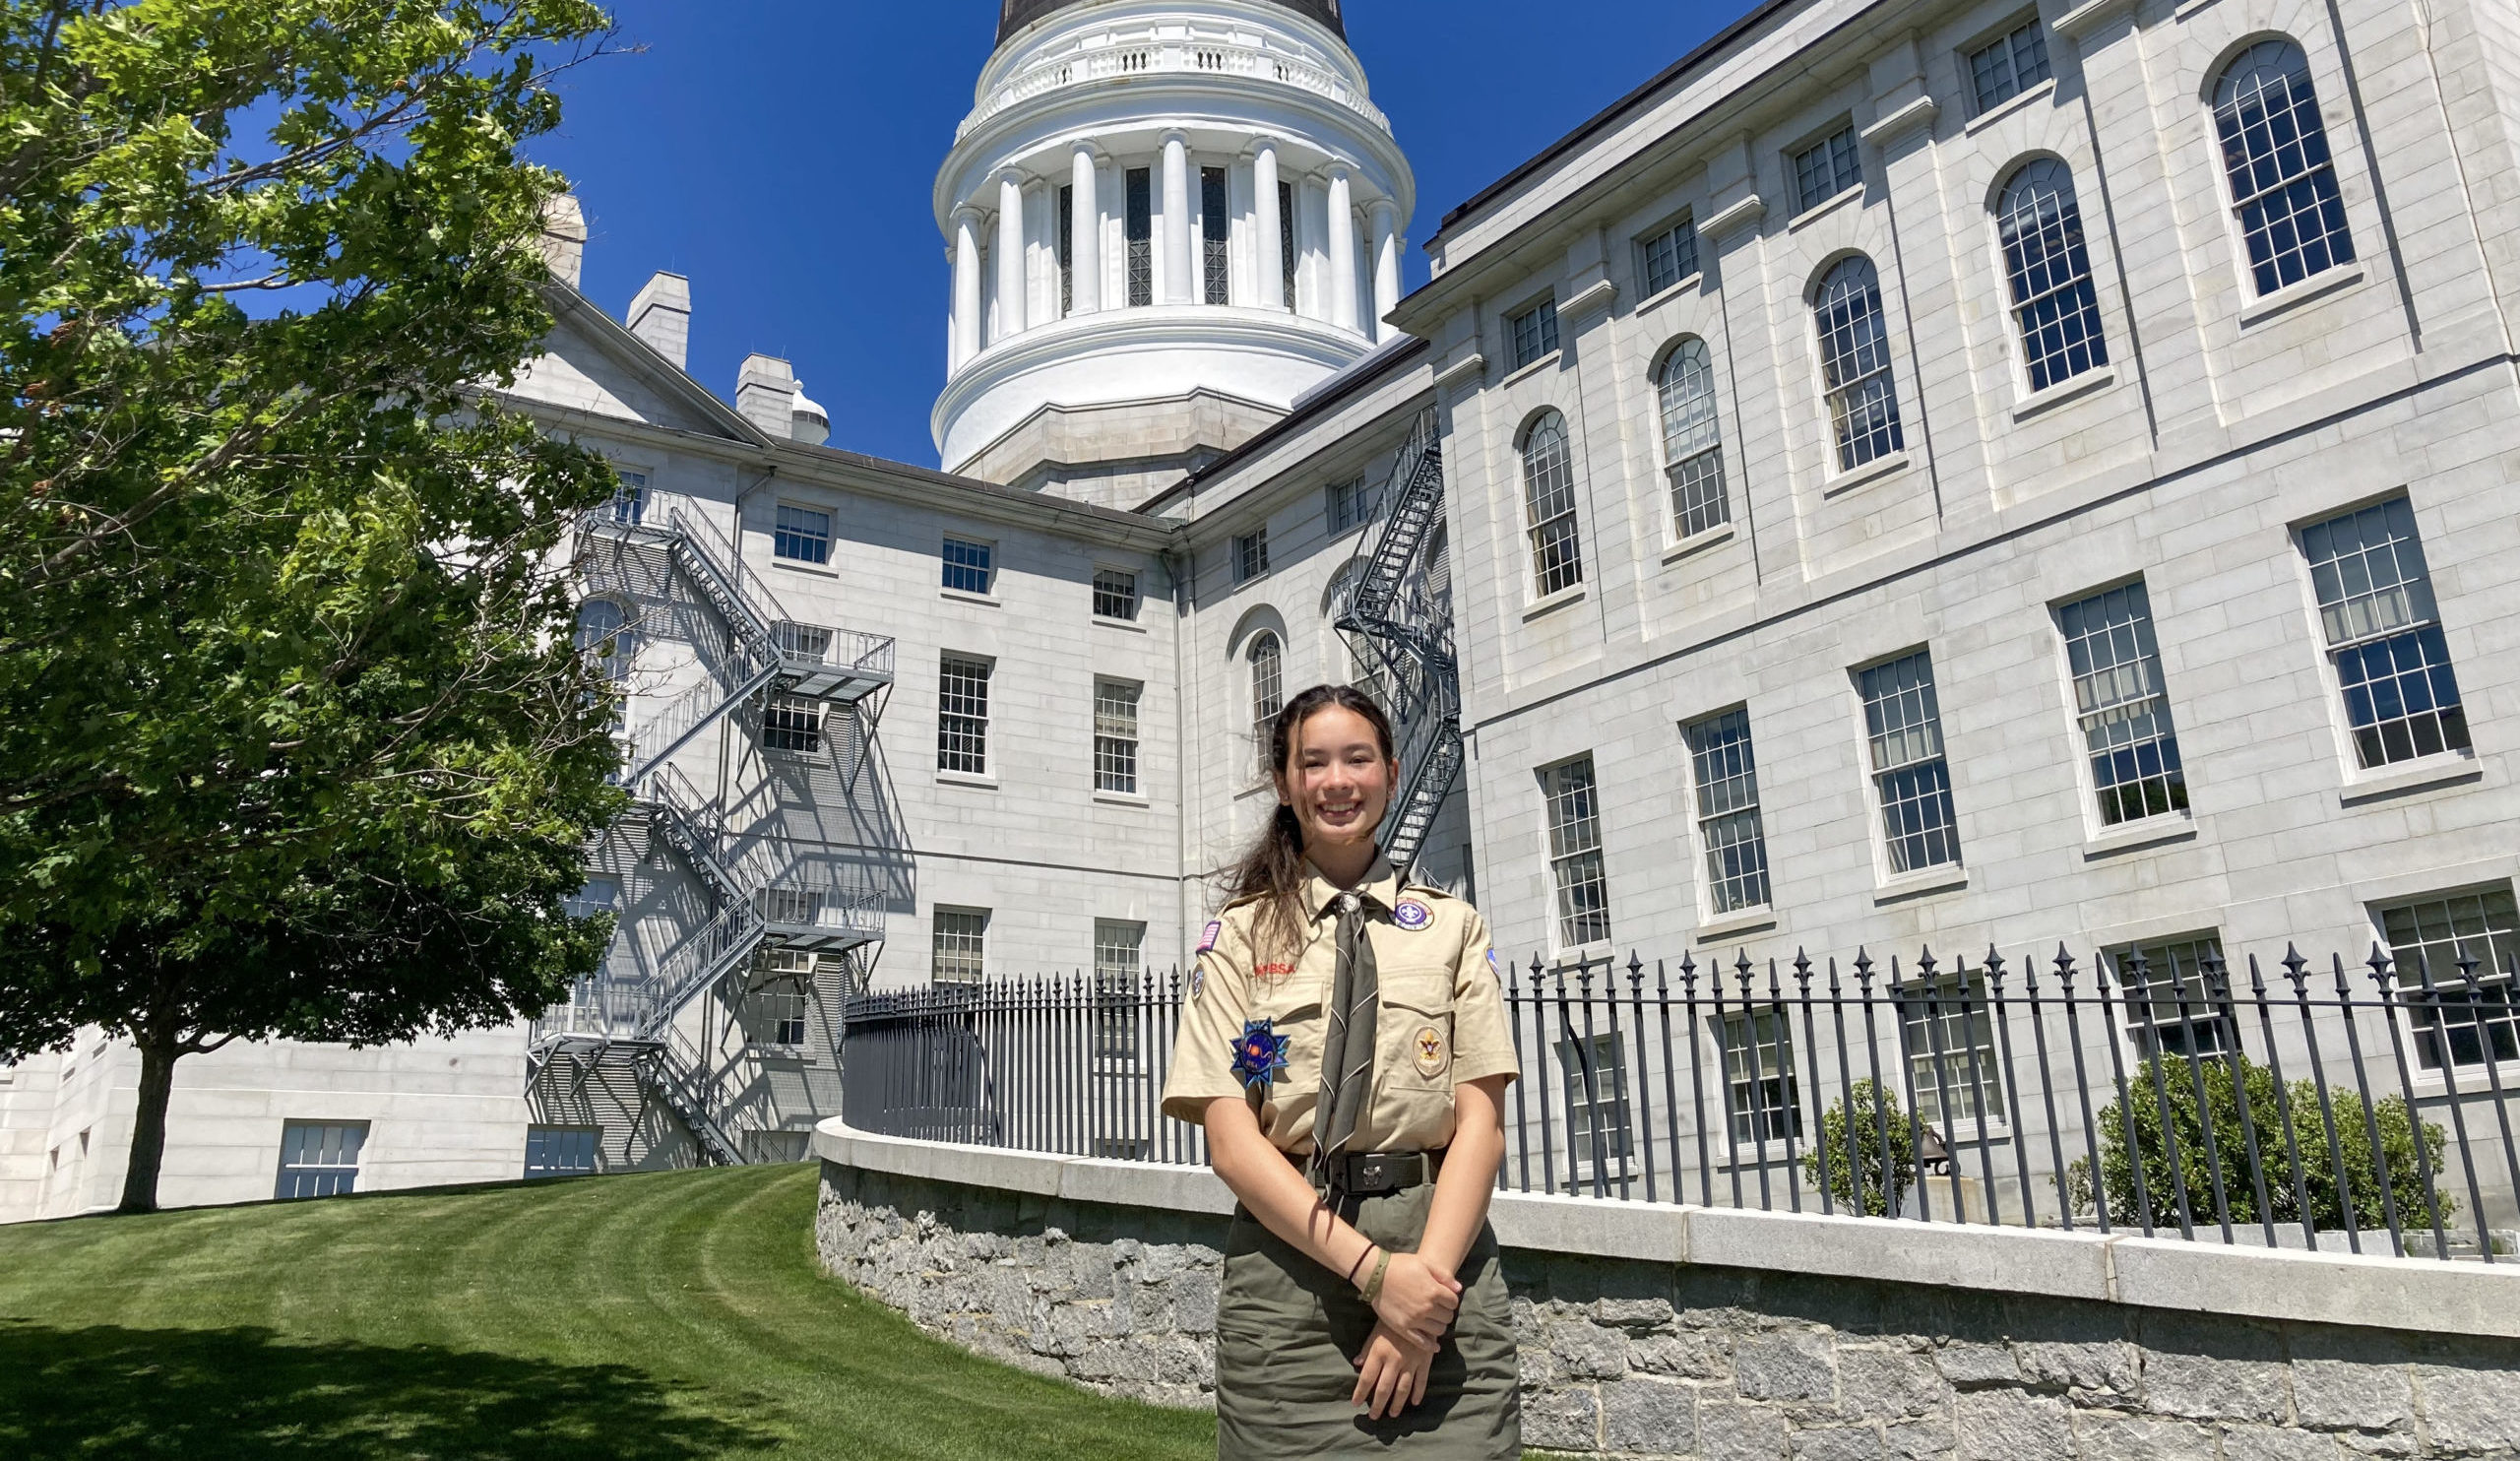 Worth reading: Sea Scout, Scouts BSA member emphasizes the value of wilderness first aid